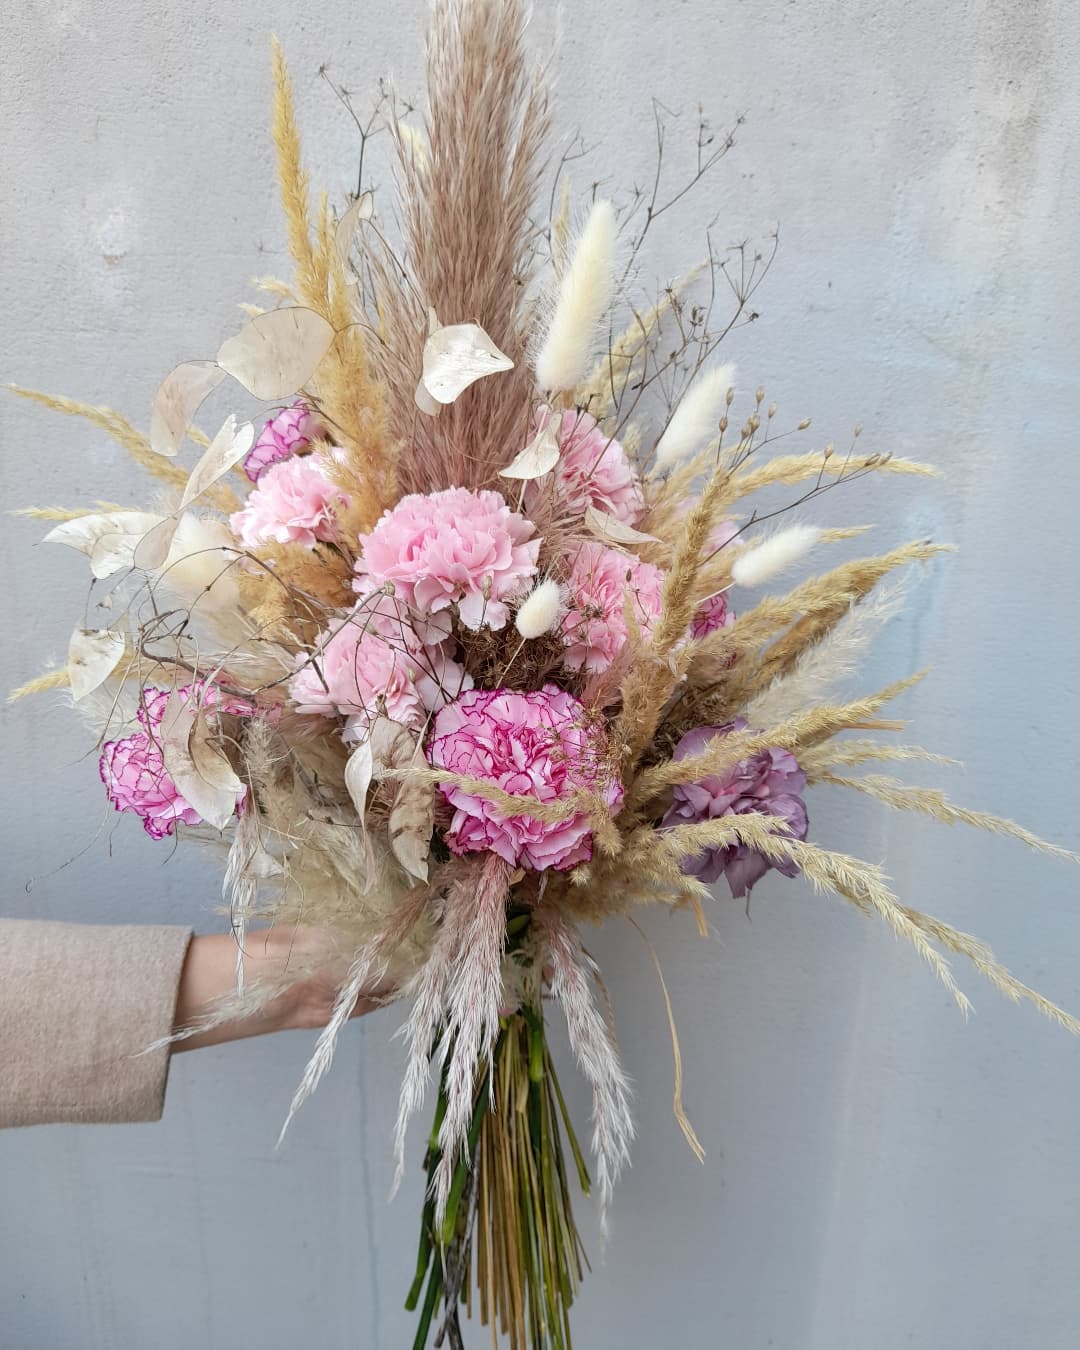 Mixed fresh and dried flower floral design - on Thursd